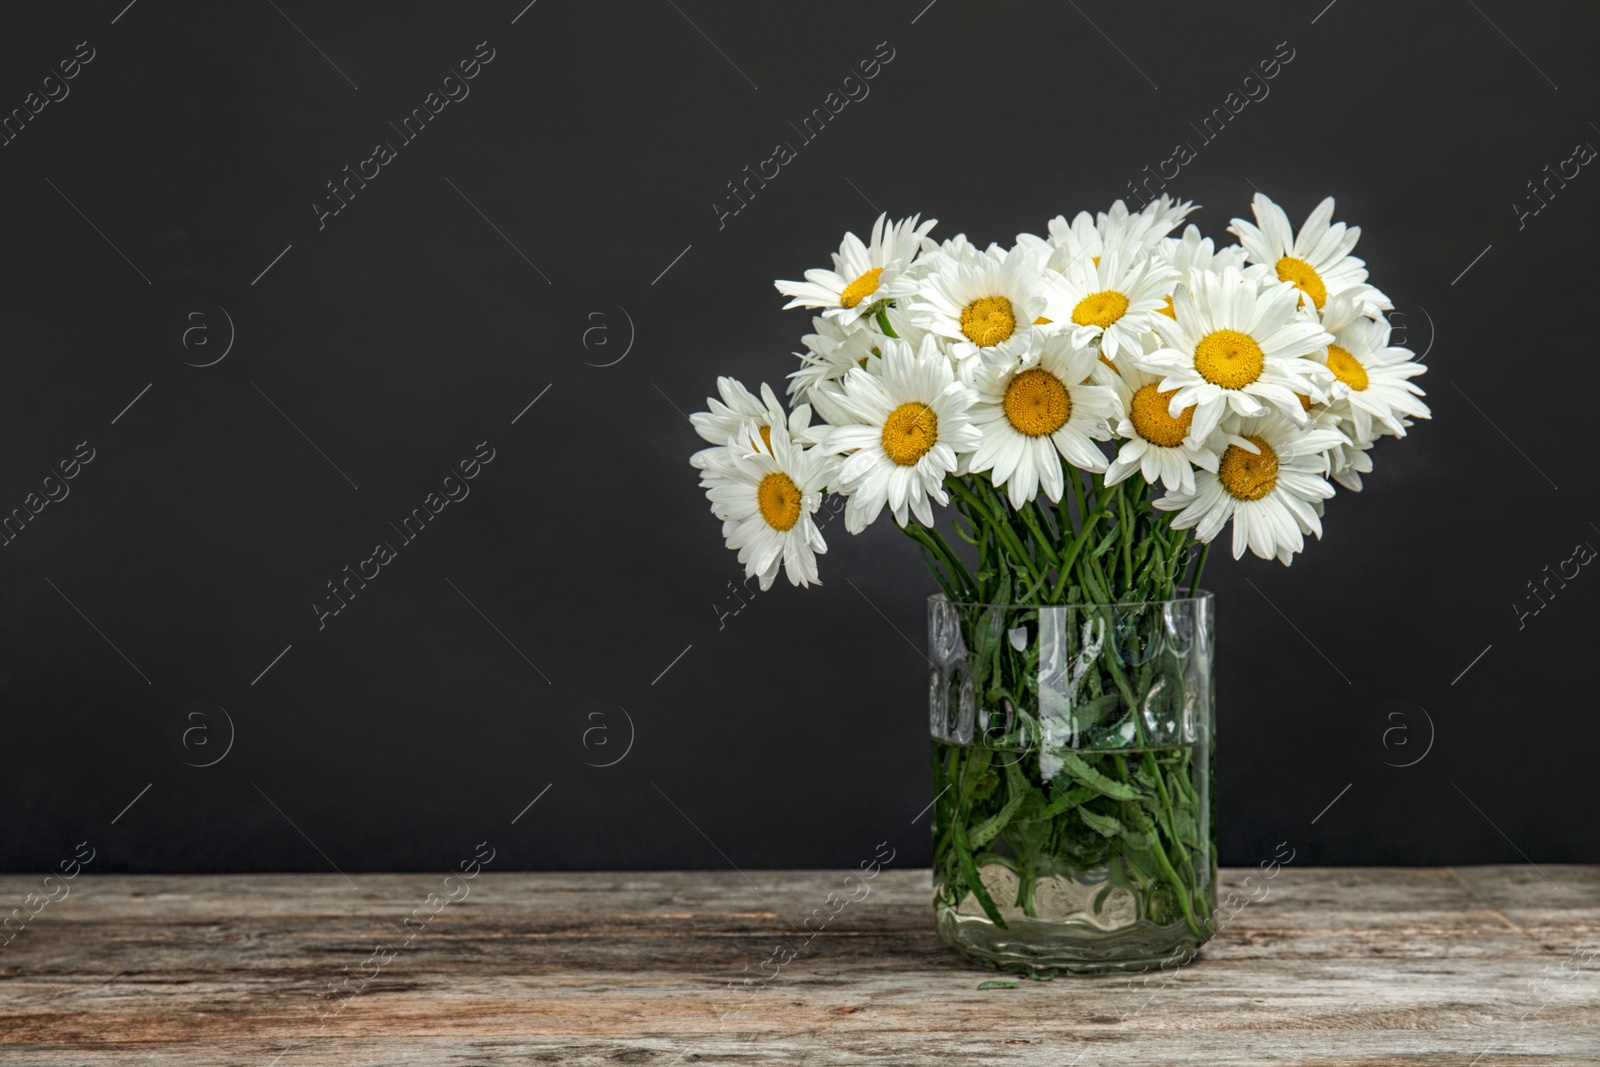 Photo of Vase with beautiful chamomile flowers on table against dark background